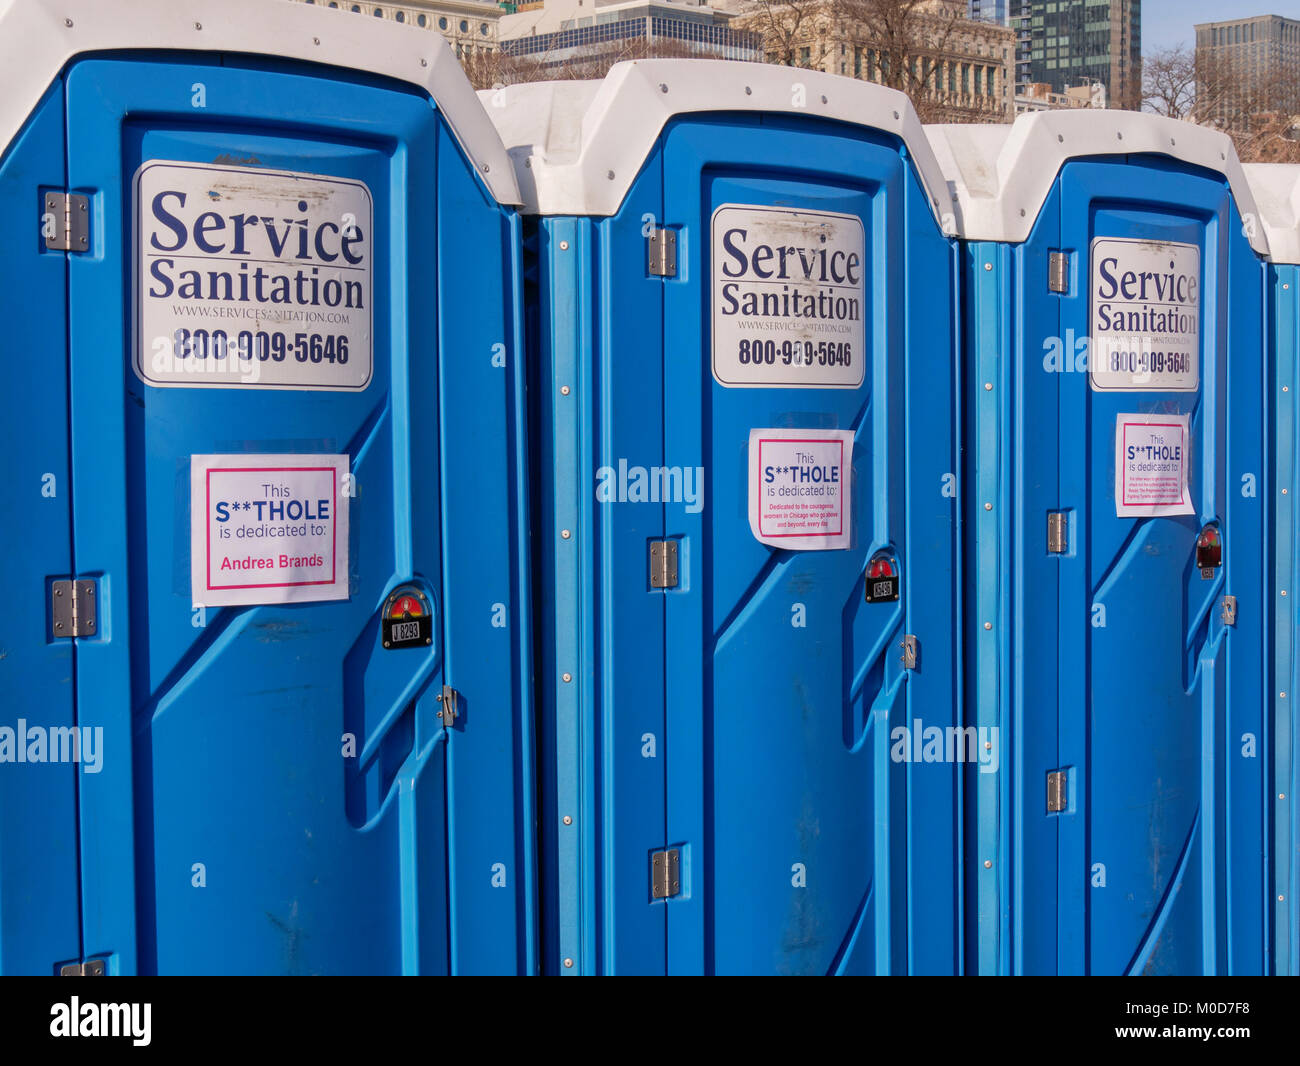 Chicago, Illinois, USA. 20th January 2018. Nearly 300,000 women and men gathered in Grant Park  for the Women's March to the Polls in this city today.  Mobile toilets featured dedications mocking a recent statement by President Trump. Stock Photo